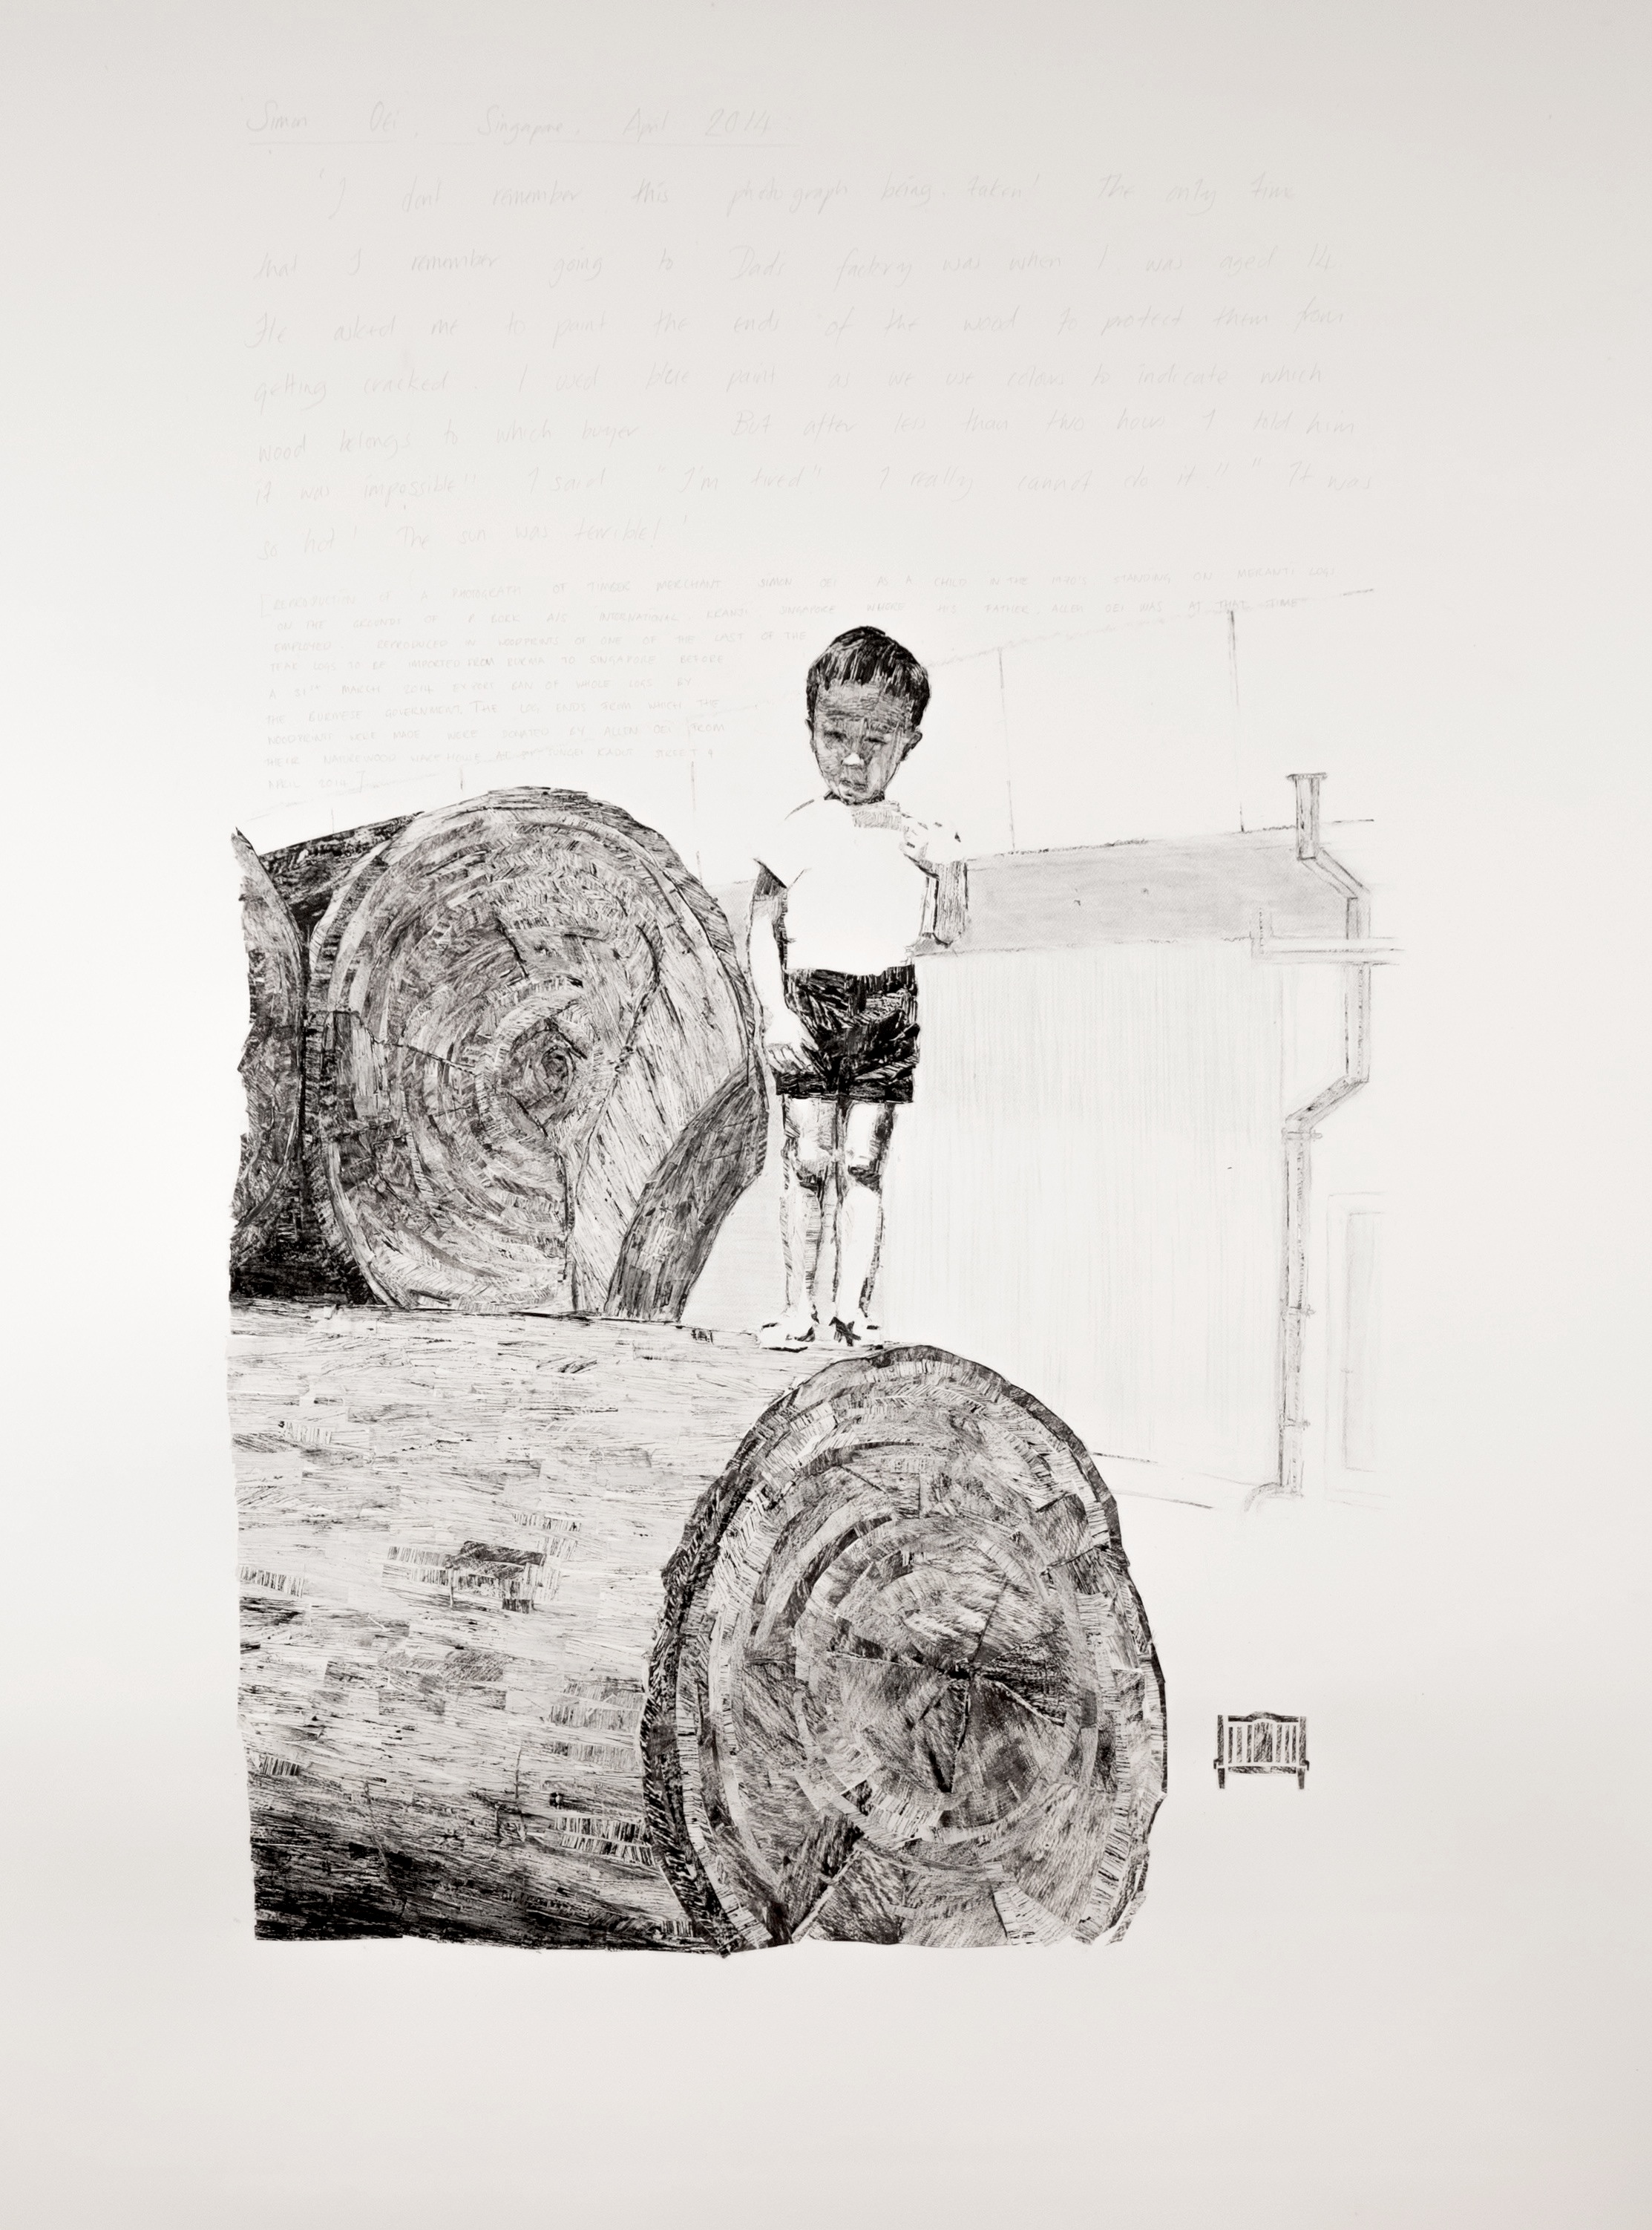  A woodprint collage illustaration of a child standing on top of a large log/tree trunk.